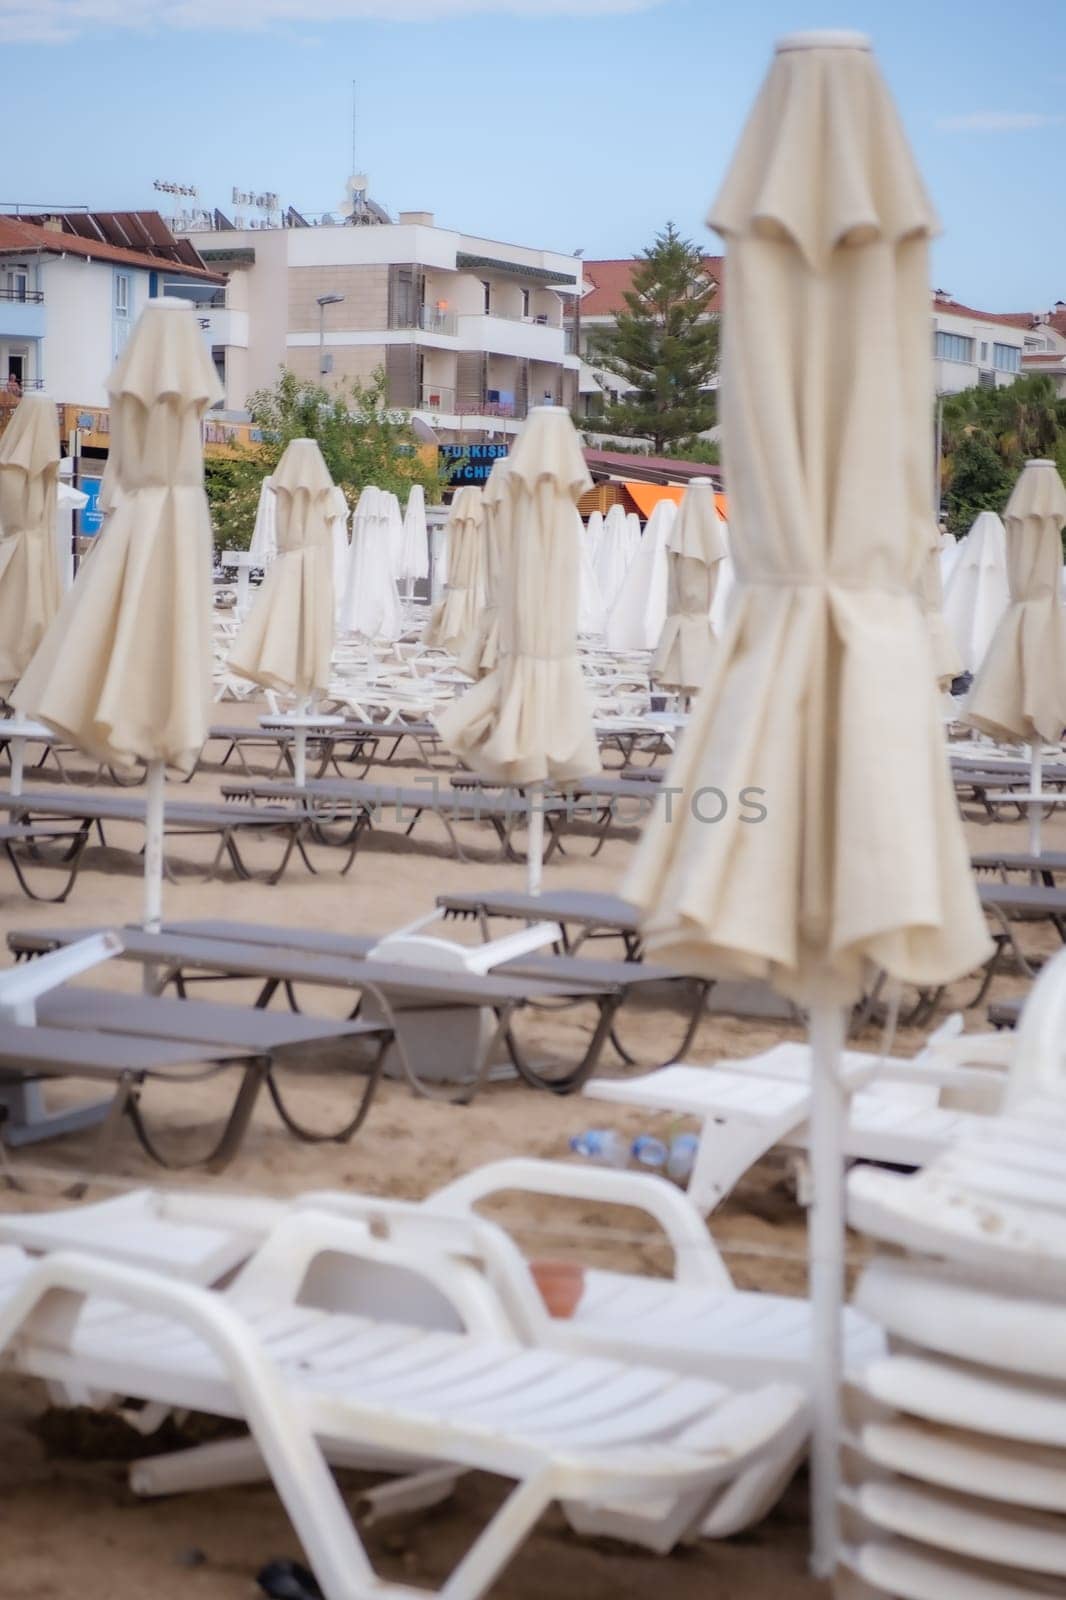 Beach in Antalya, Turkiye. Umbrellas and sun loungers in the assembled state on the beach.